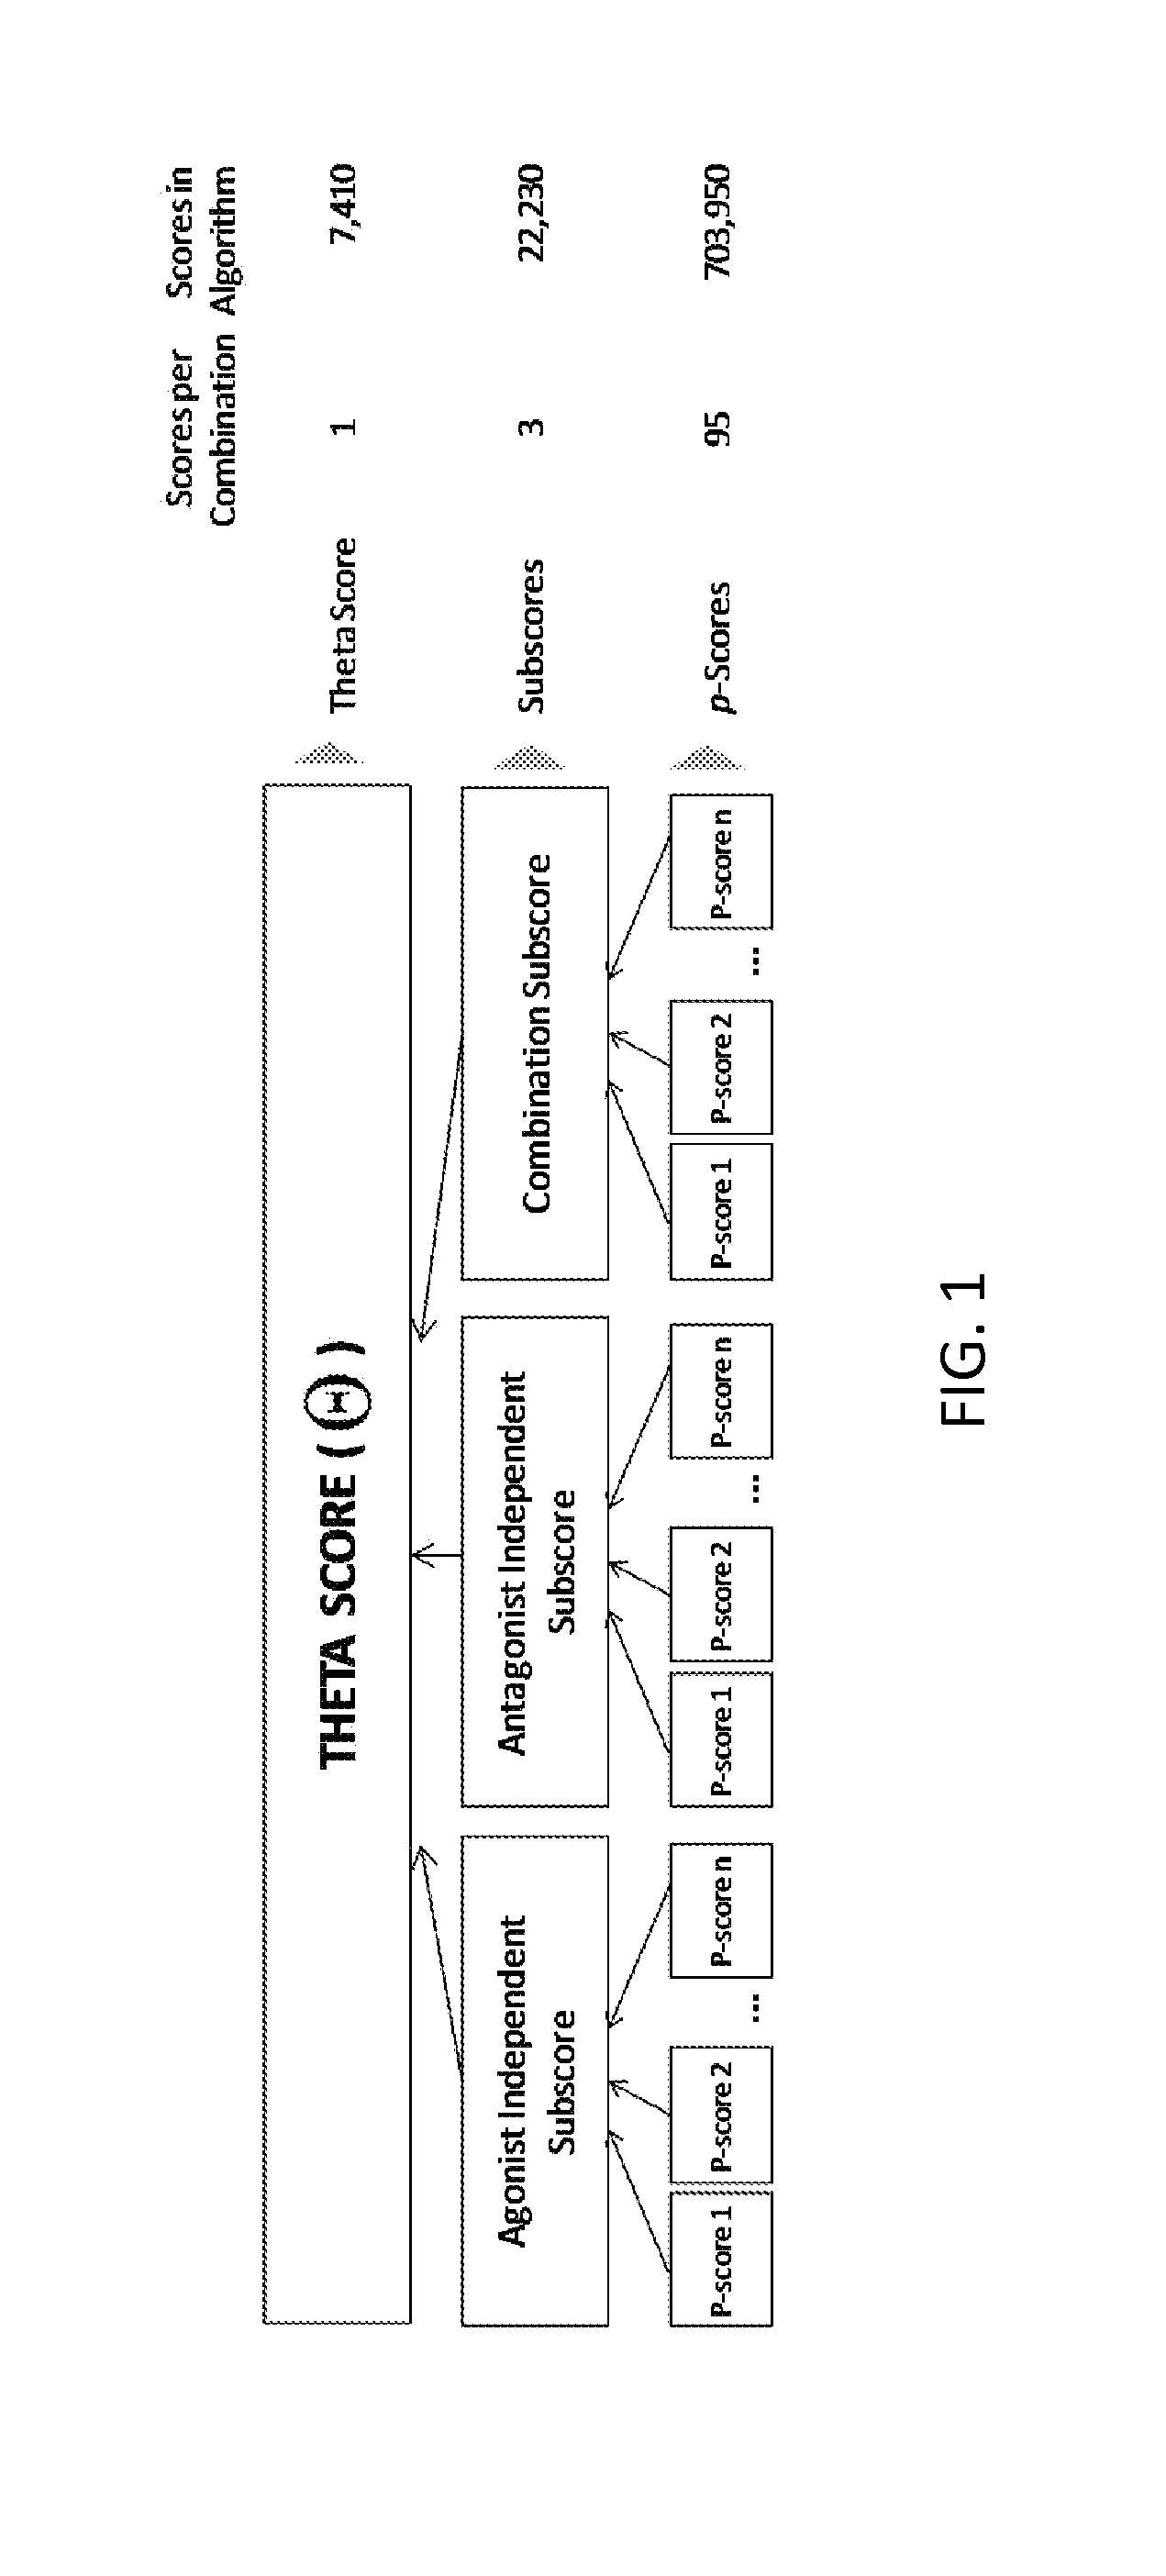 Methods and compositions for treatment of disorders ameliorated by muscarinic receptor activation